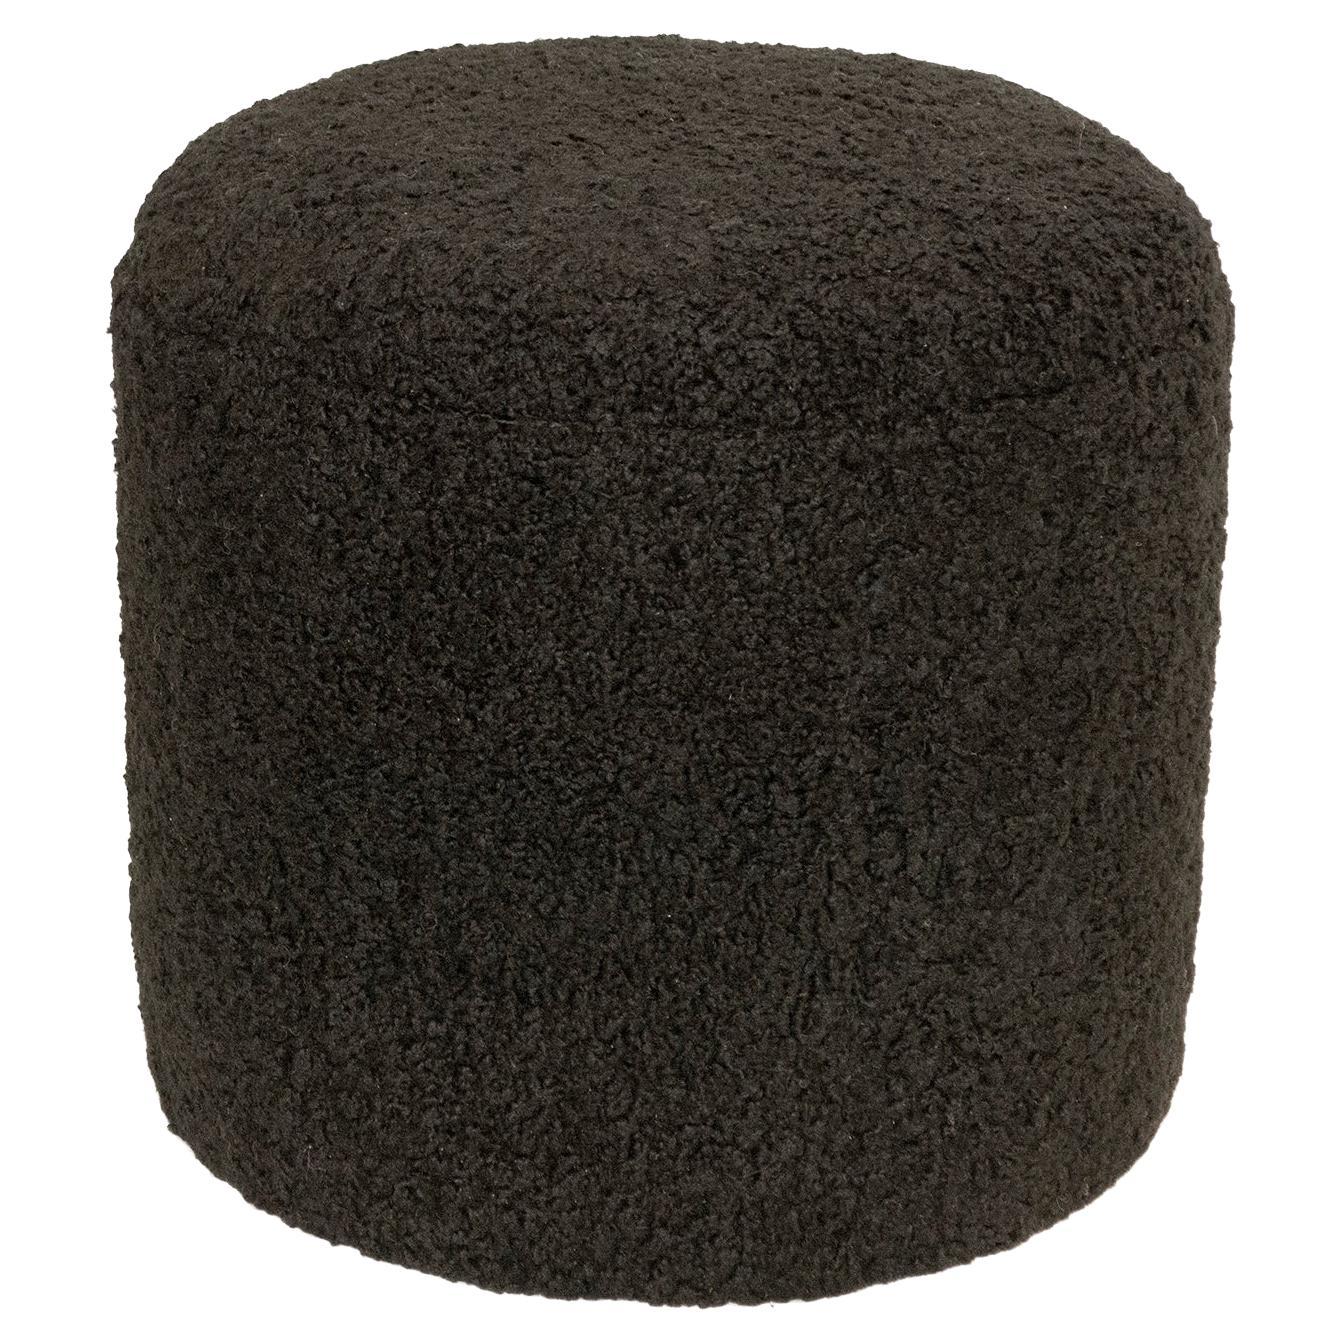 Limited Edition Custom Modern Pouf in Black Faux Shearling